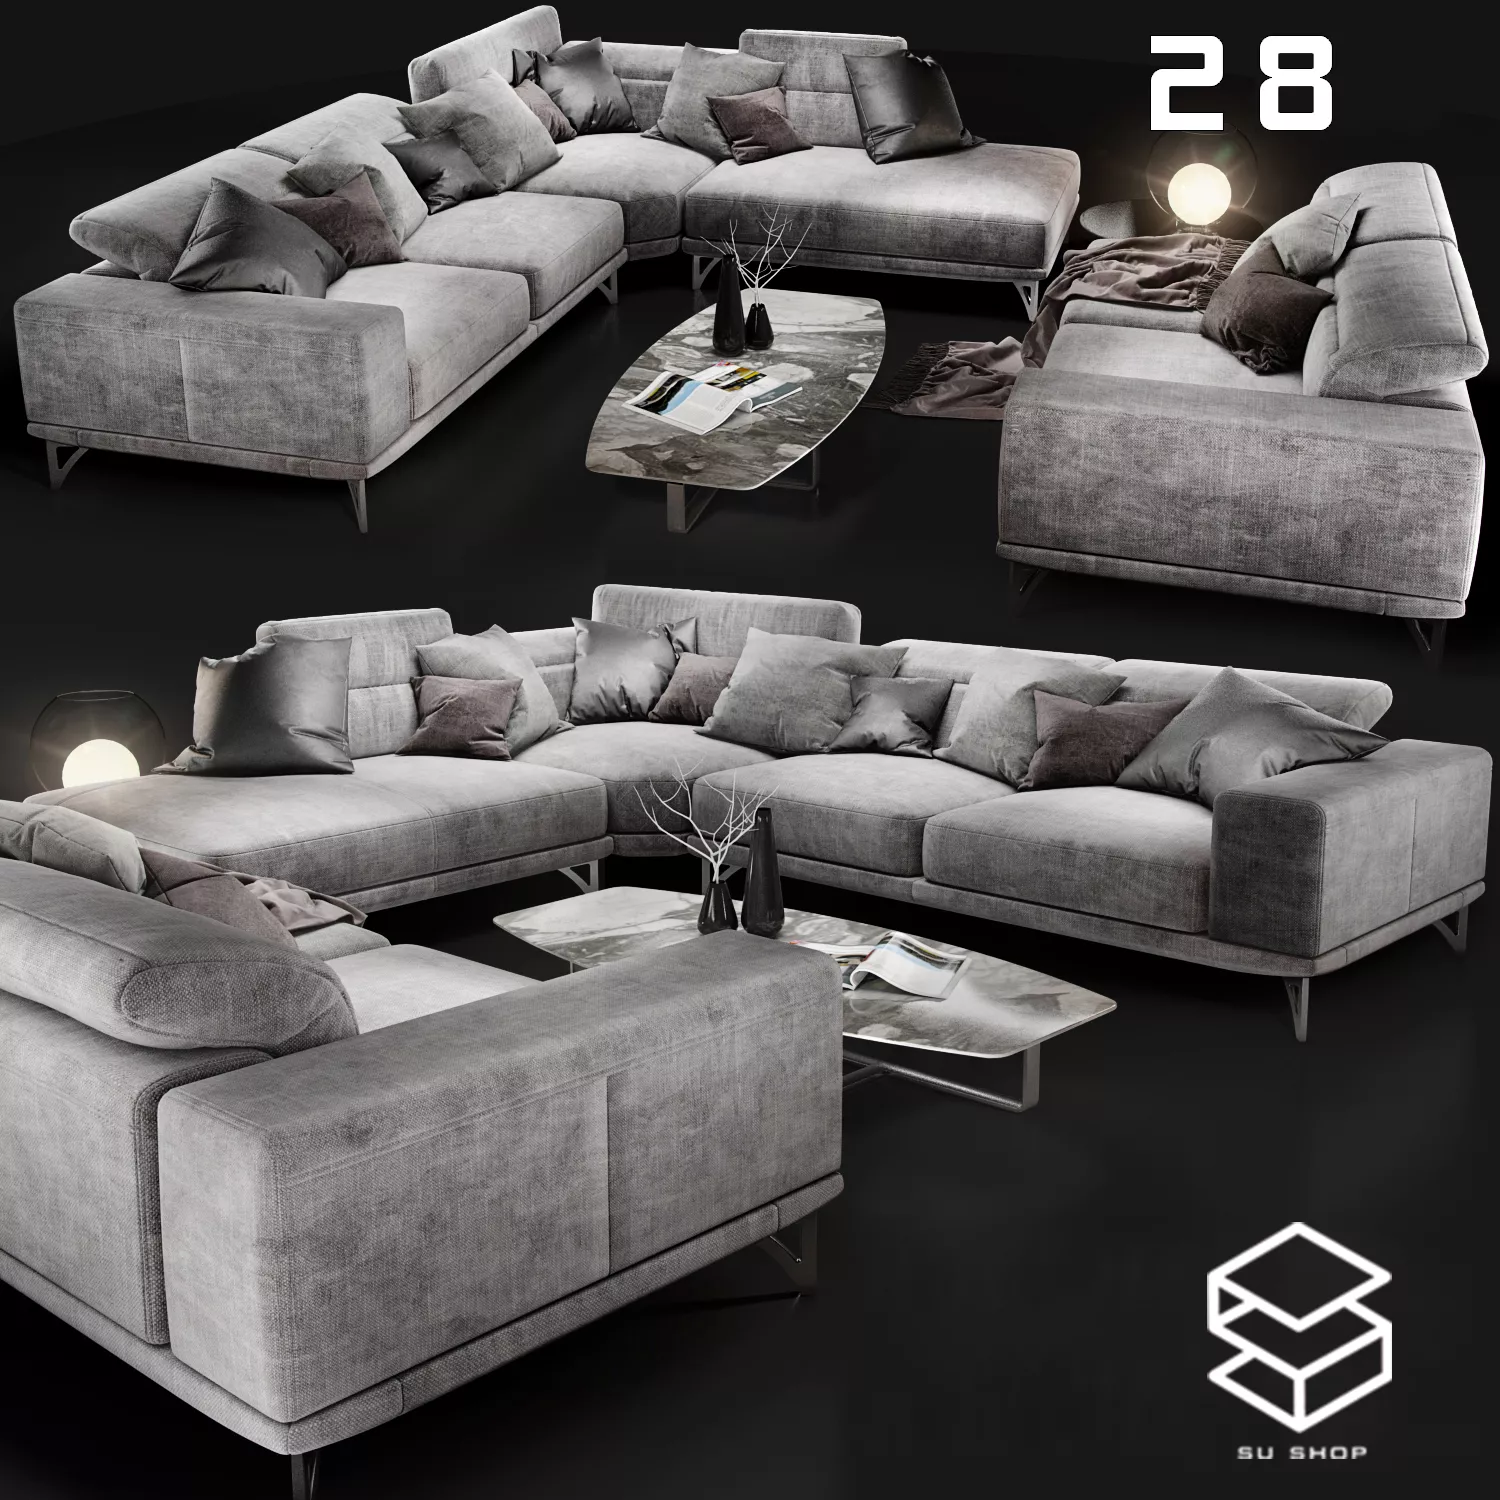 MODERN SOFA - SKETCHUP 3D MODEL - VRAY OR ENSCAPE - ID13585